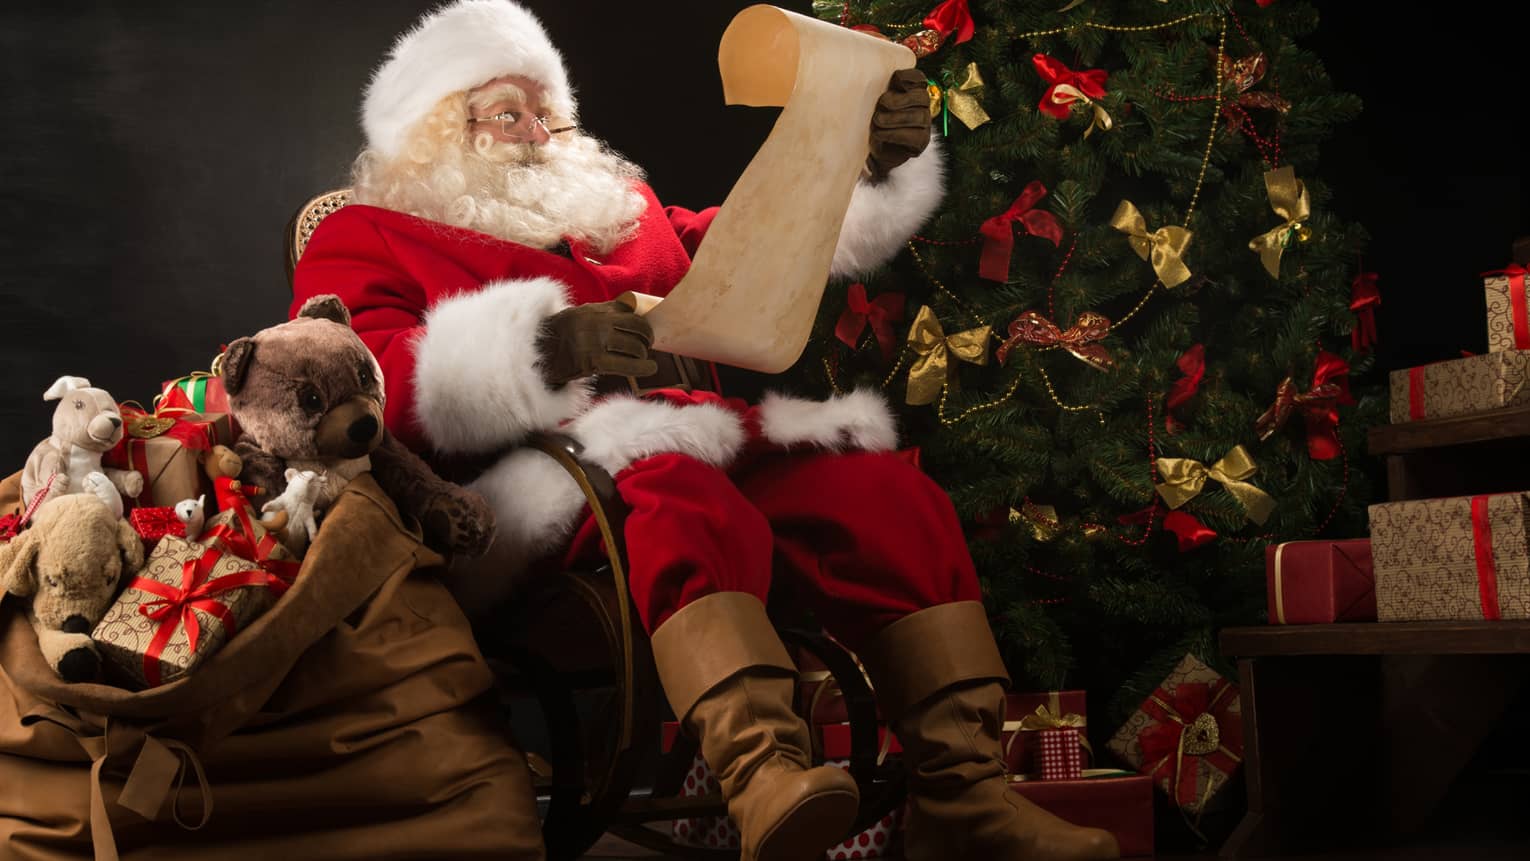 Santa Claus seated in large rocker holding a scroll, flanked by decorated Christmas tree with gifts and overflowing gift bag